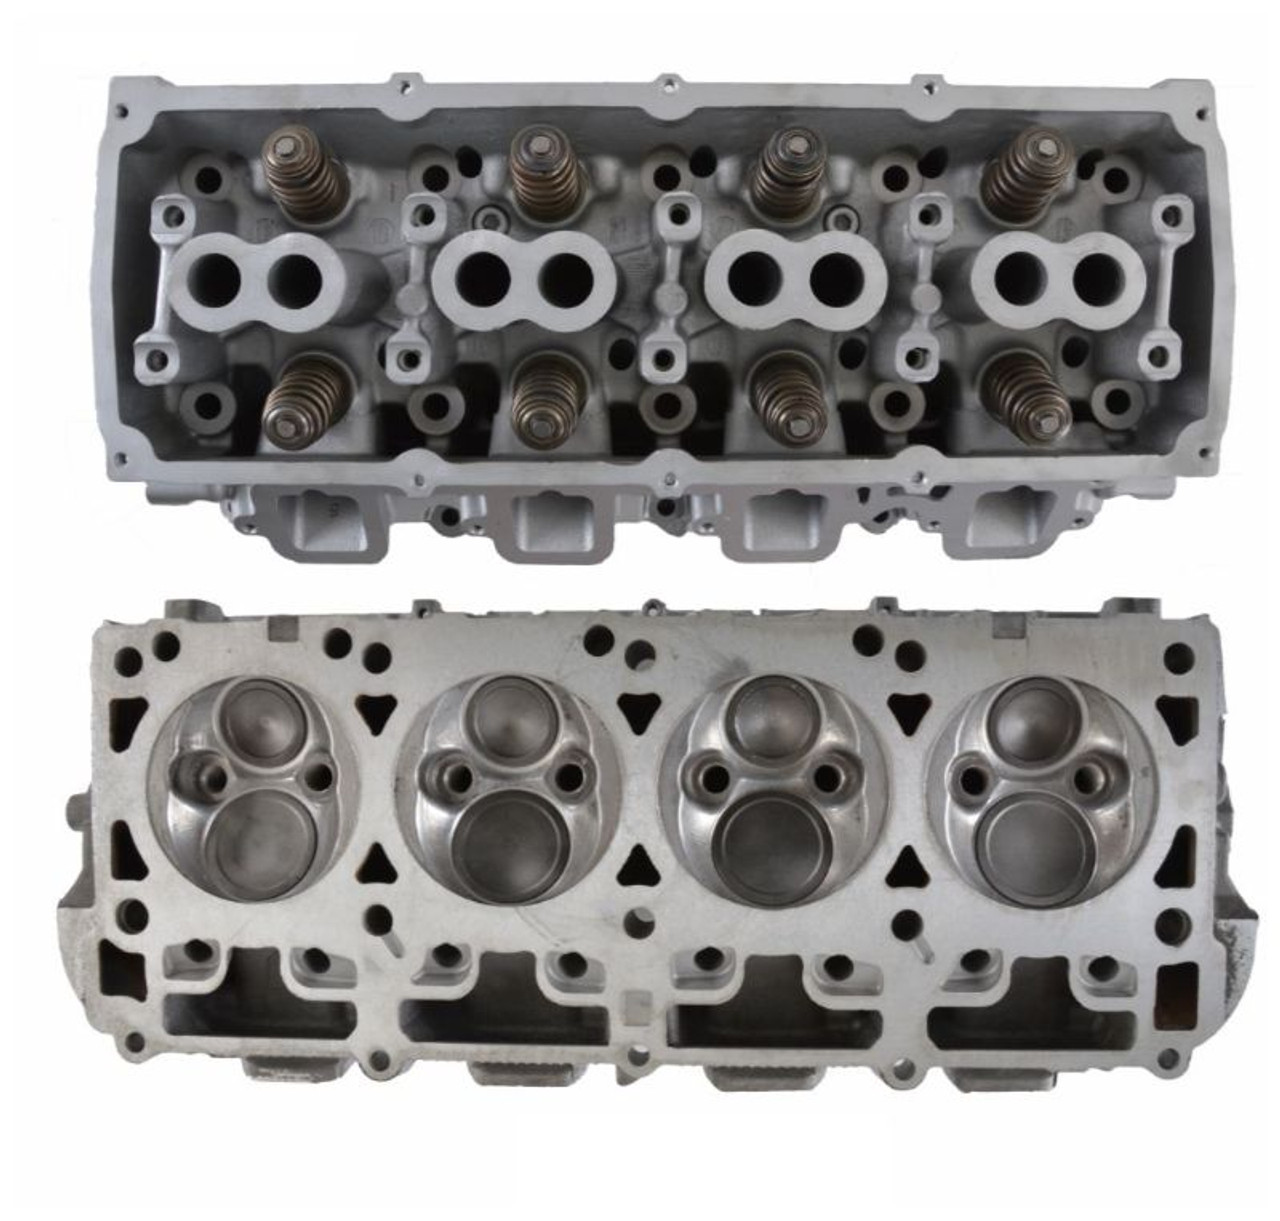 Cylinder Head Assembly - 2008 Jeep Grand Cherokee 5.7L (CH1010R.E43)